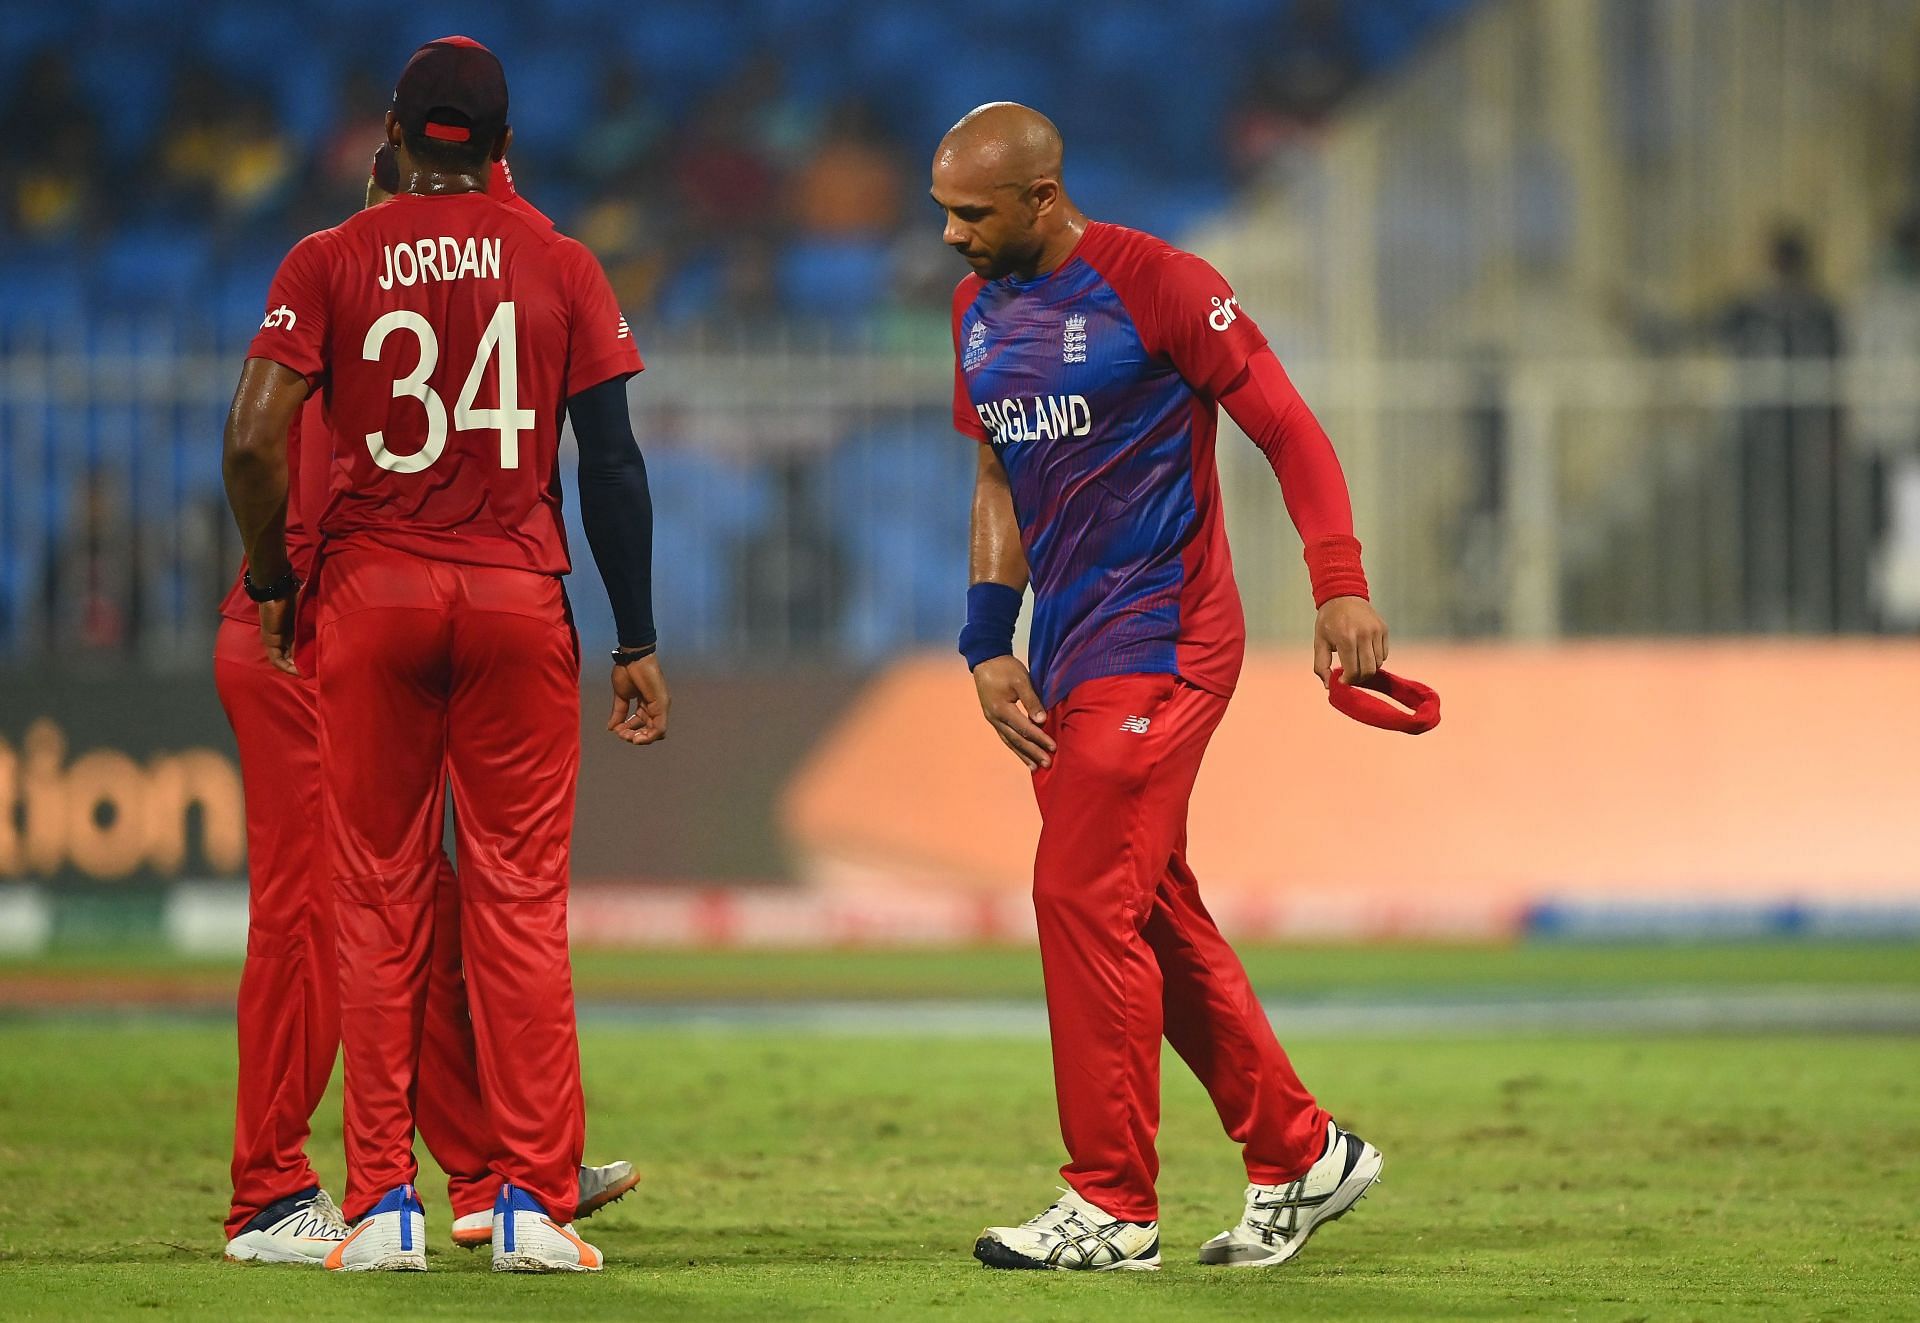 Tymal Mills failed to complete his four-over spell in the T20 World Cup match against Sri Lanka.